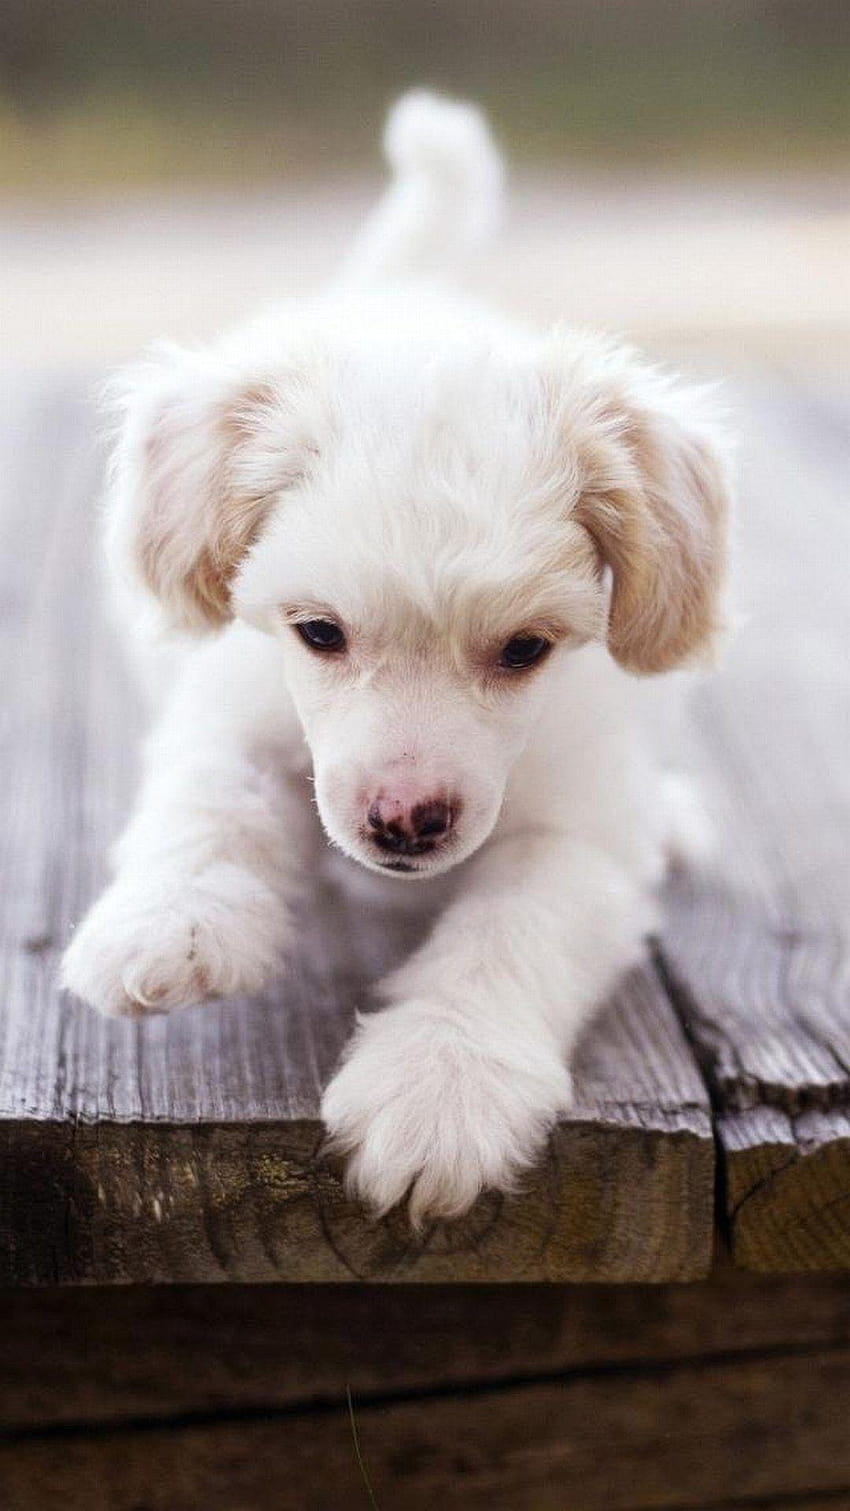 puppy dog. Cute Puppies for iPhone. Animals Phone, cute dogs and puppies for mobile HD phone wallpaper